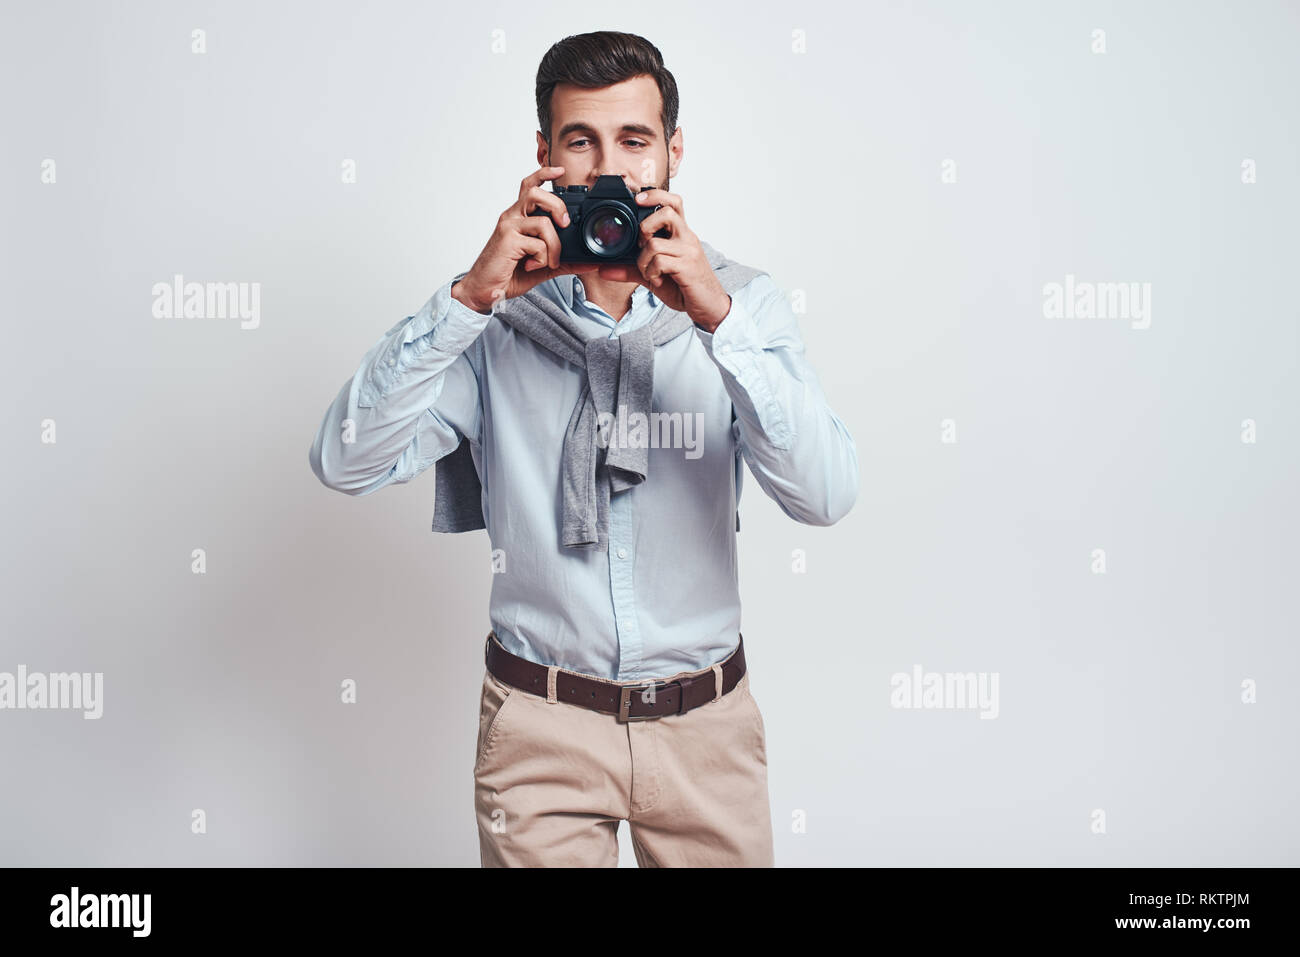 Smile. Close up photo of handsome male photographer in casual clothes who is taking photos with camera on the grey background. Studio portrait Stock Photo